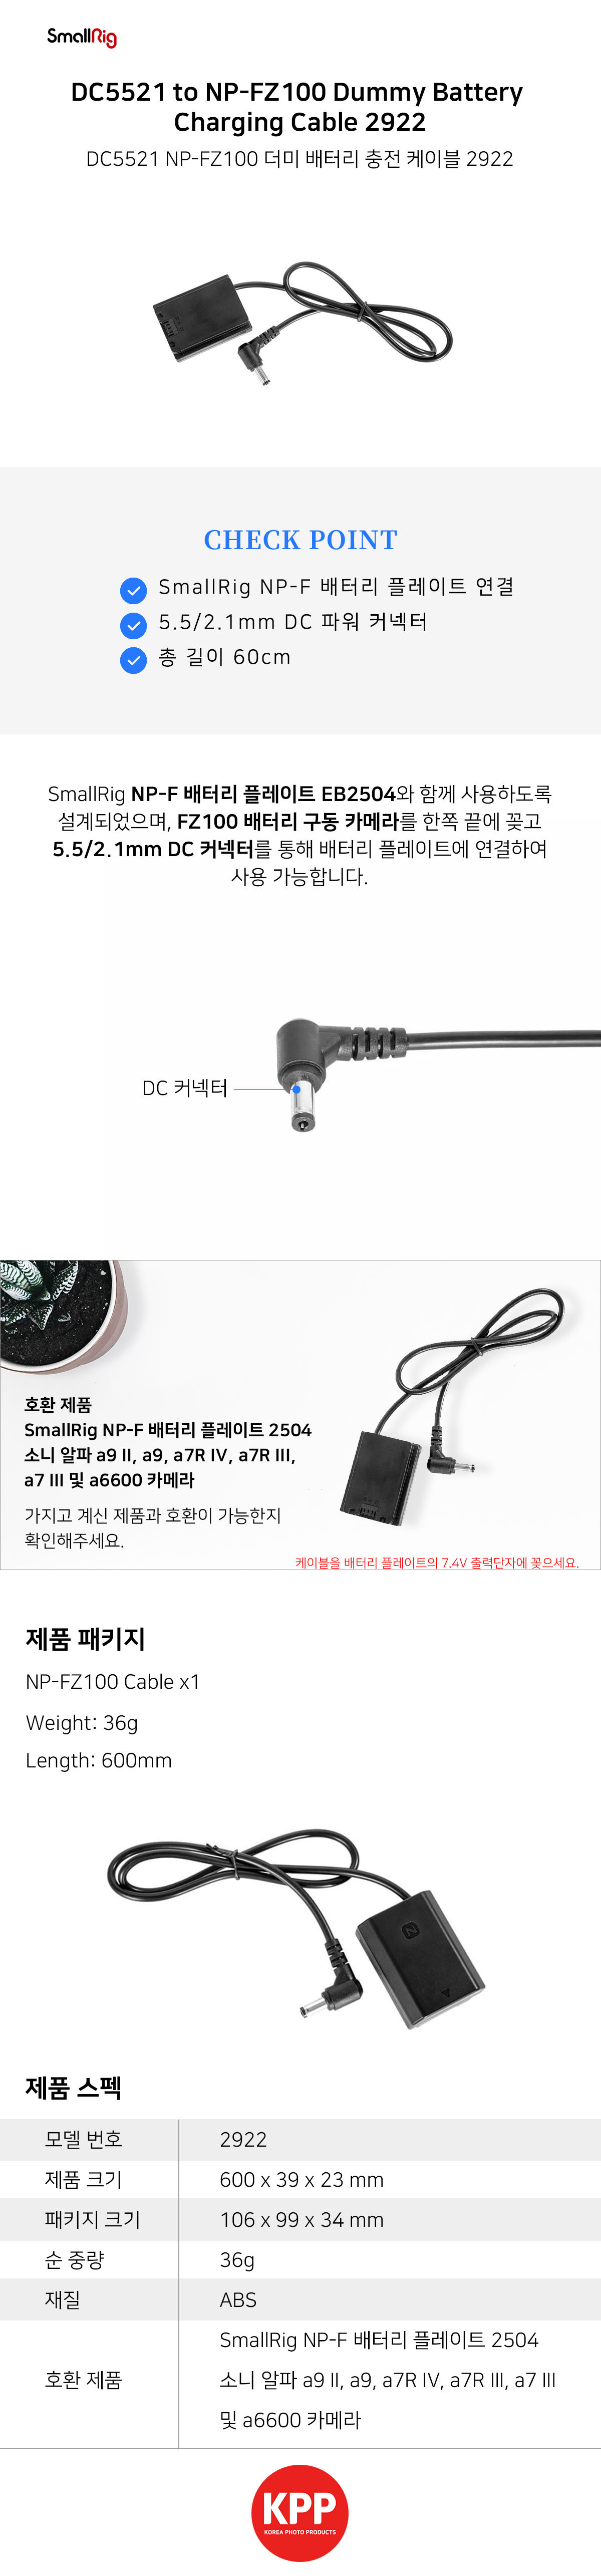 Battery_Charging_Cable-2922-01.jpg